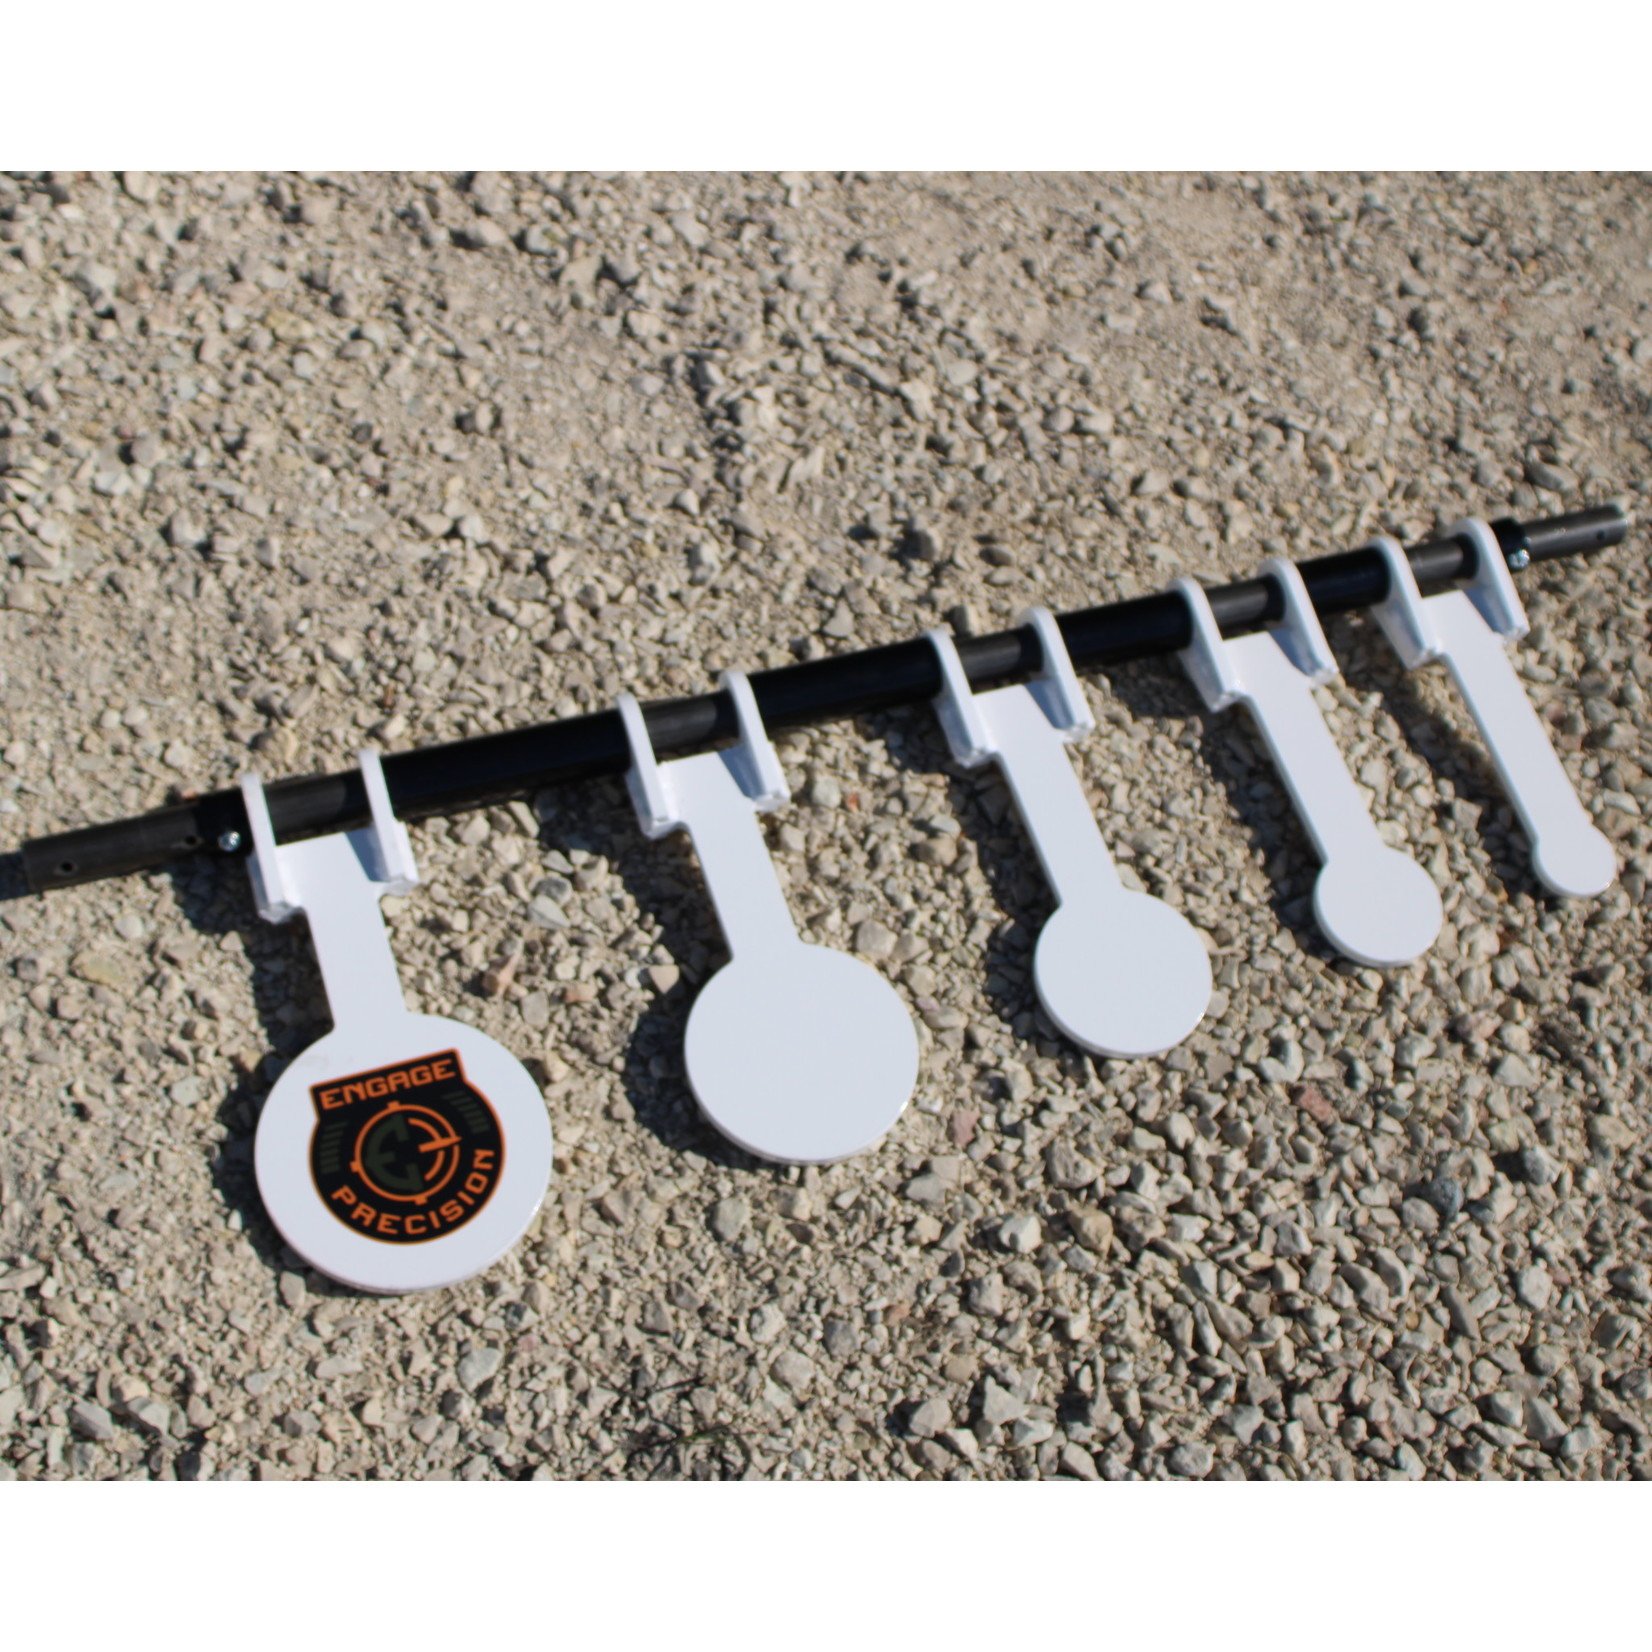 ENGAGE PRECISION ENGAGE PRECISION AR500 STEEL RIFLE REACTIVE KYL TARGET SET, 3/8”, W/ 5 TARGETS, 2”-6”, WHITE